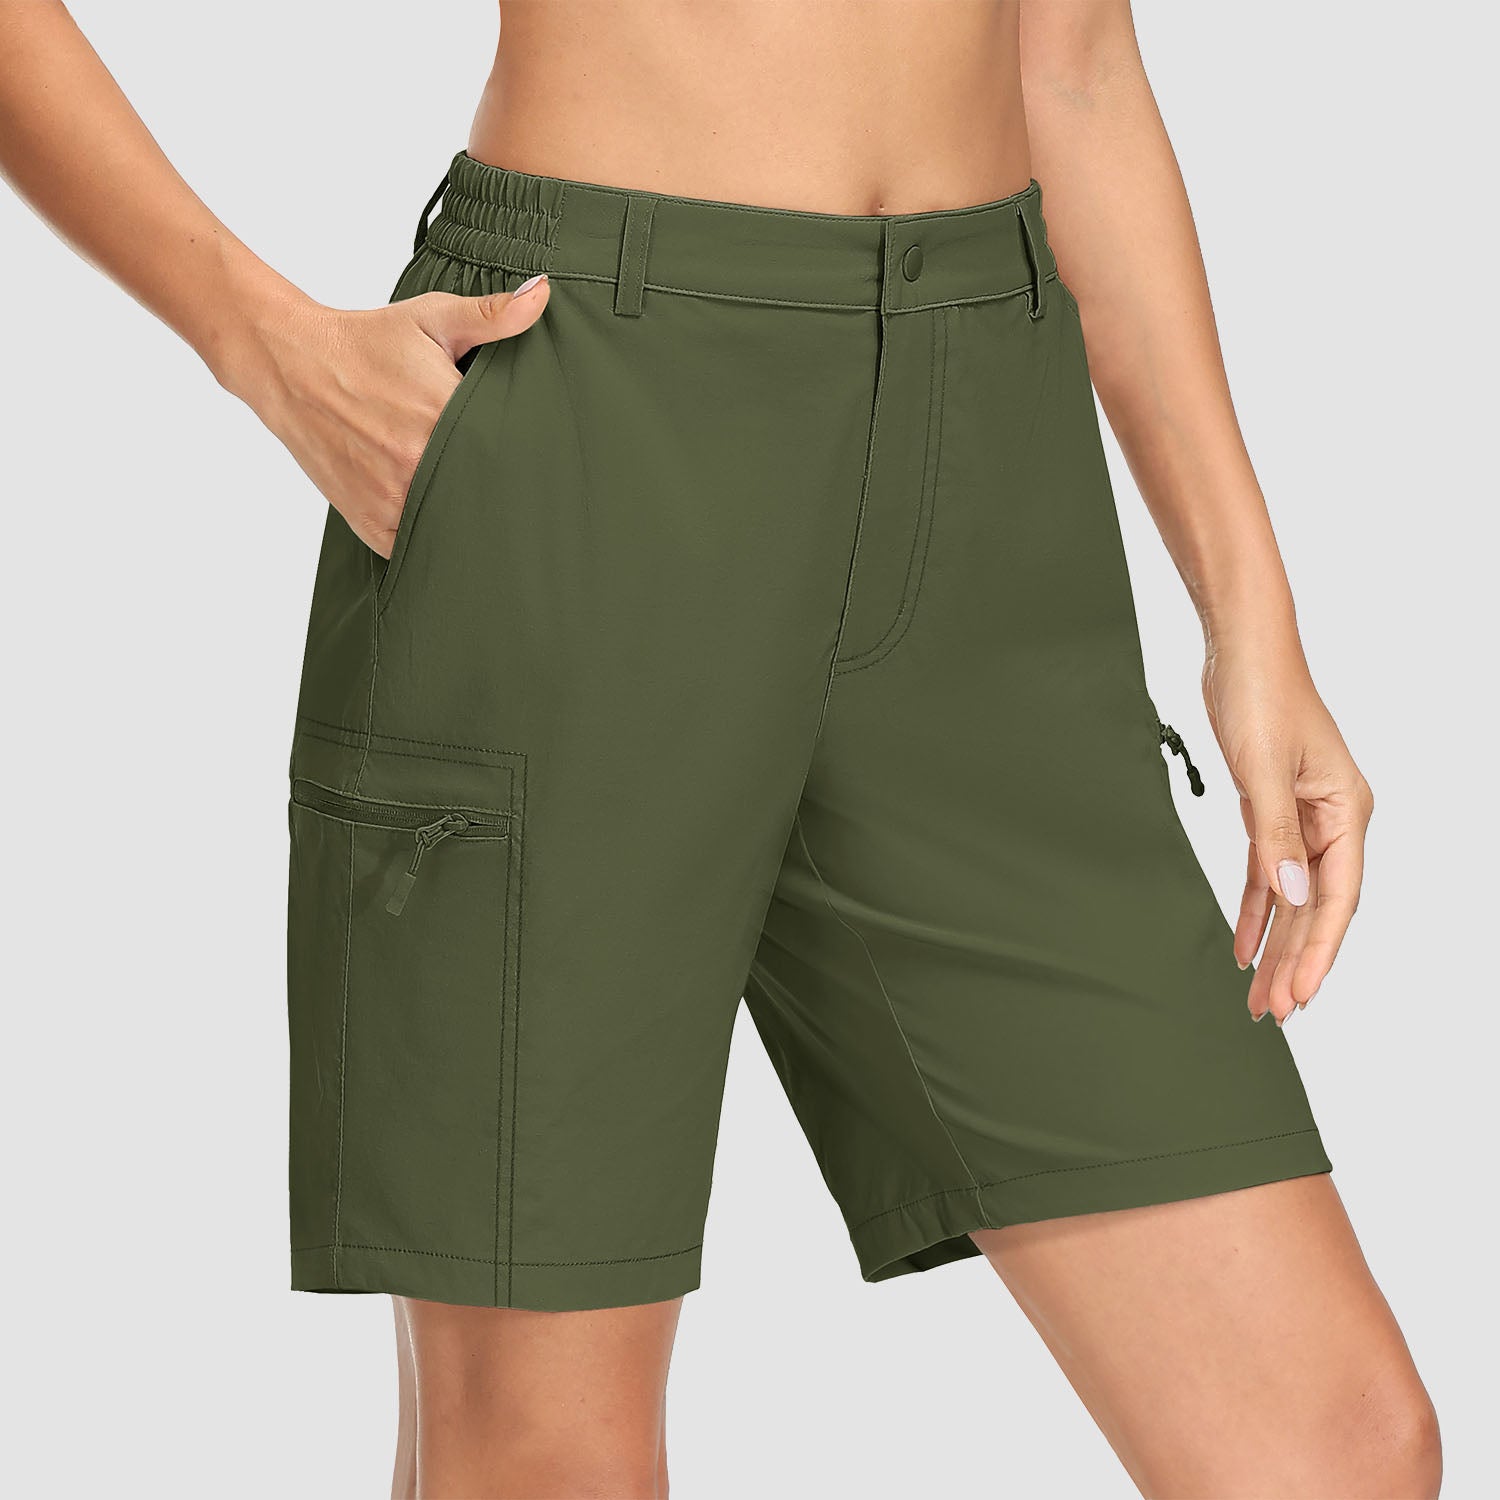 Women's Hiking Shorts with 5 Pockets Water-Resistant Ripstop Cargo Shorts Quick Dry